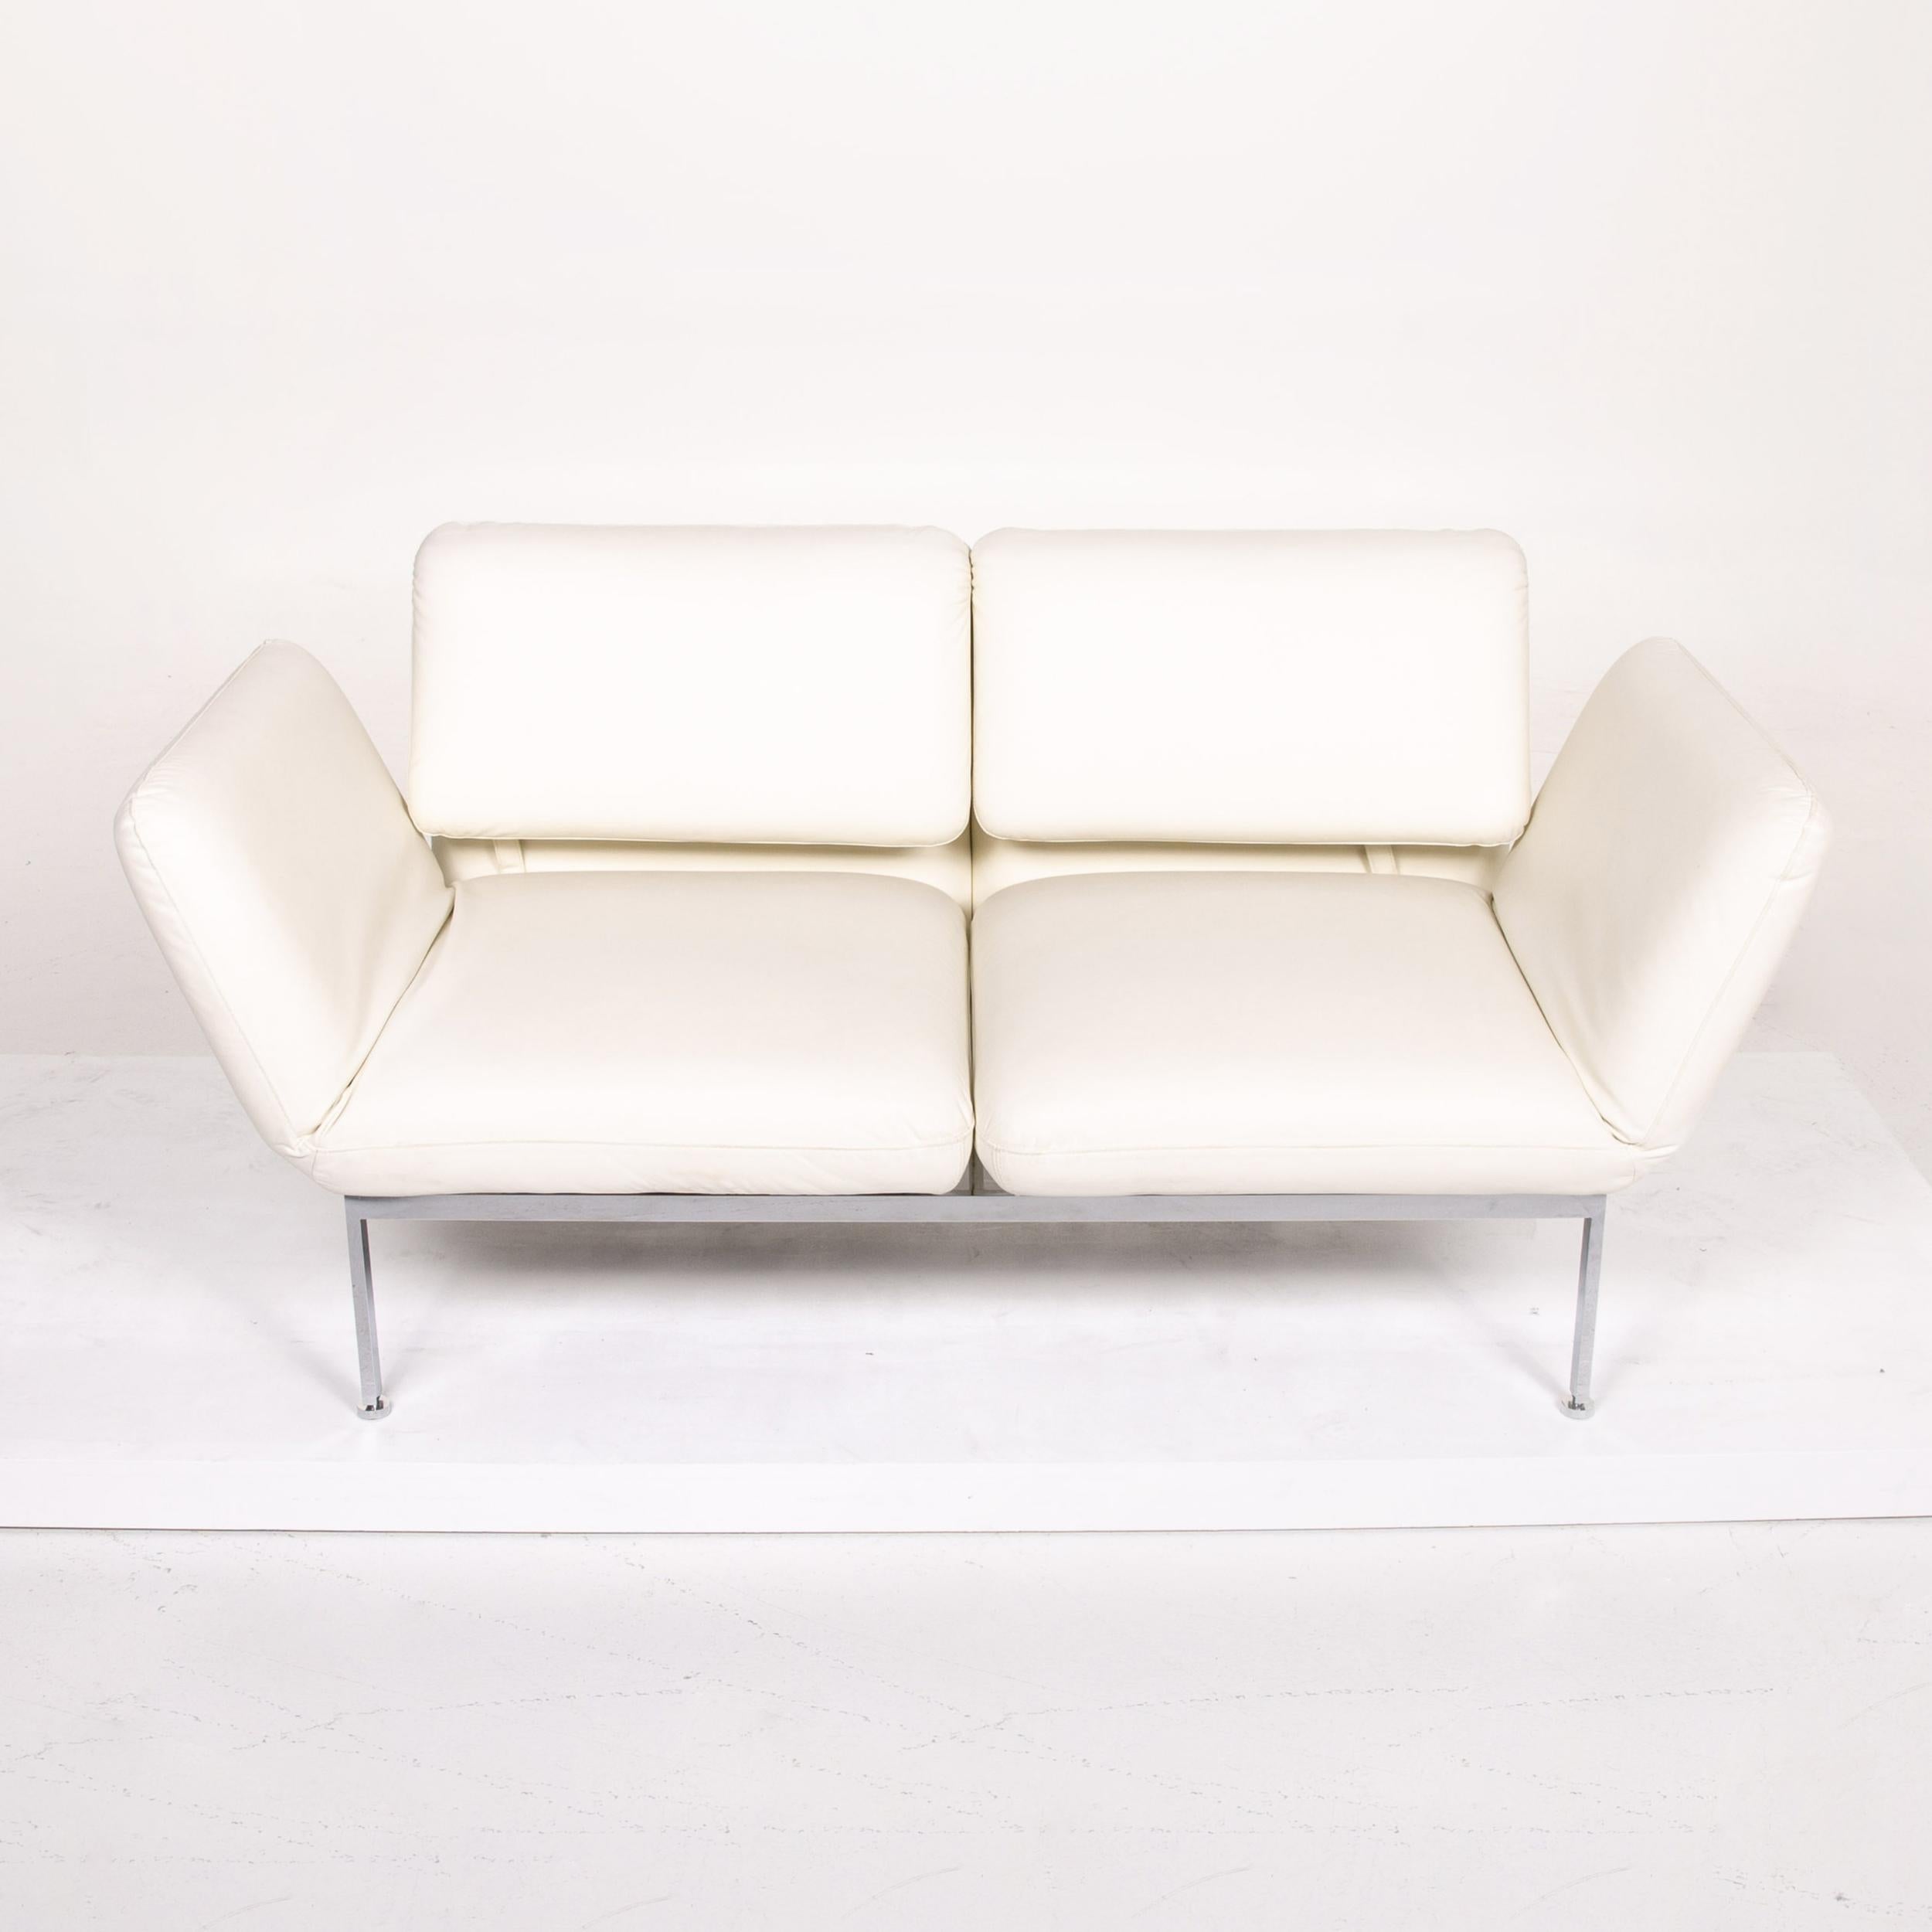 Brühl & Sippold Roro Leather Sofa White Two-Seat Function Sleeping Function For Sale 6